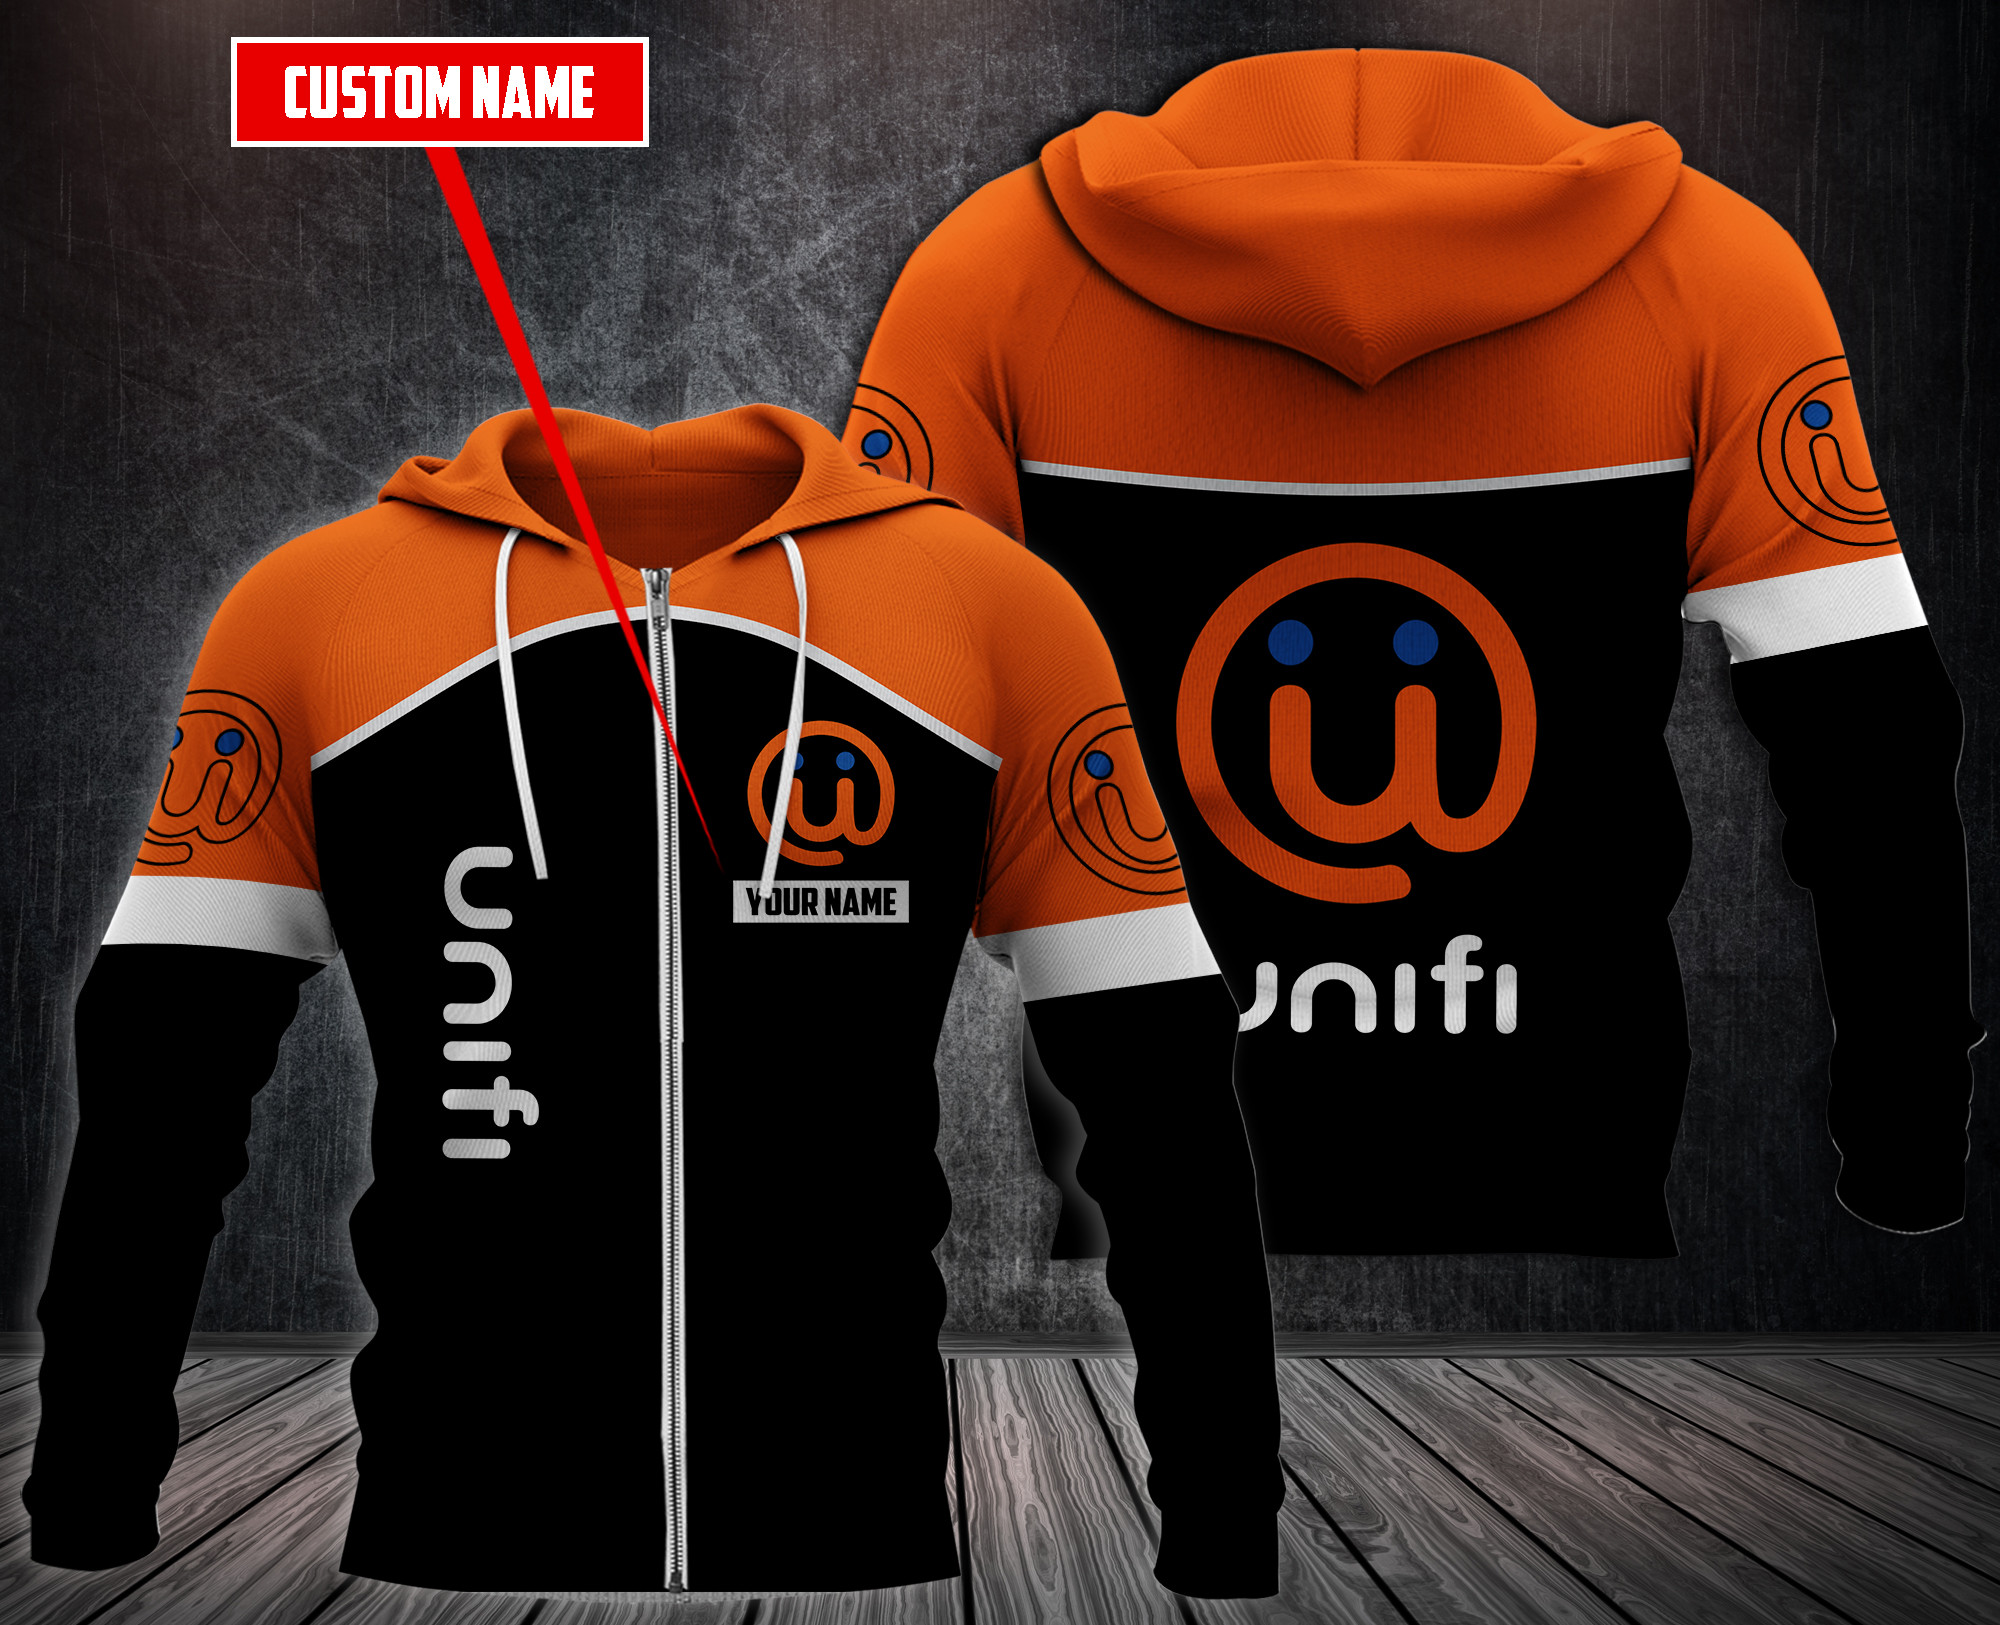 Choose the right hoodies for you on our boxboxshirt and ethershirt websites in 2022 67